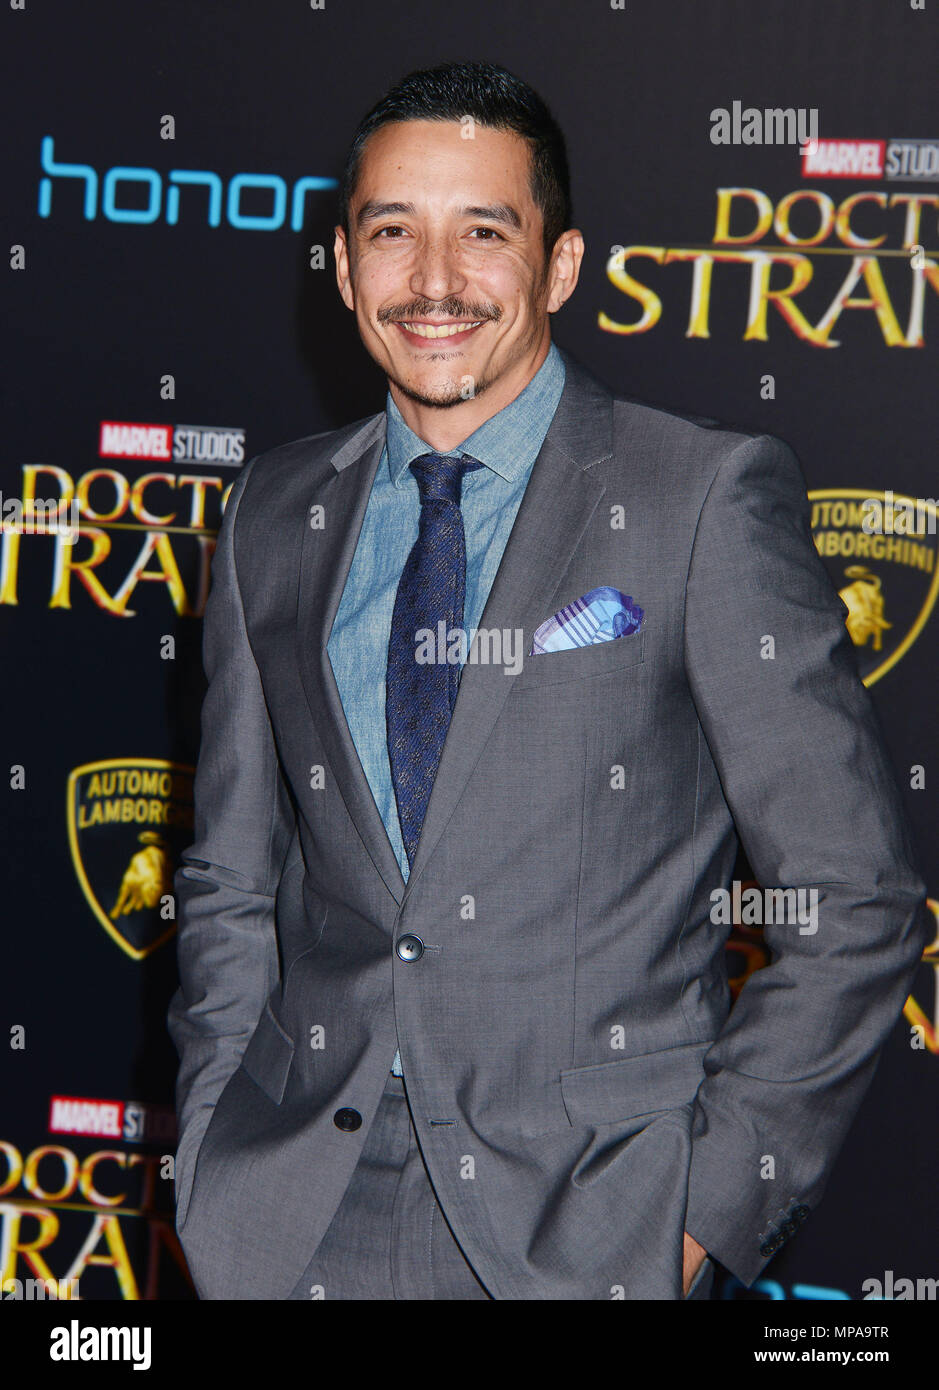 Gabriel Luna At The Doctor Strange Premiere At The El Capitan And Tcl Chinese Theatre In Los Angeles October 16 Gabriel Luna Red Carpet Event Vertical Usa Film Industry Celebrities Photography